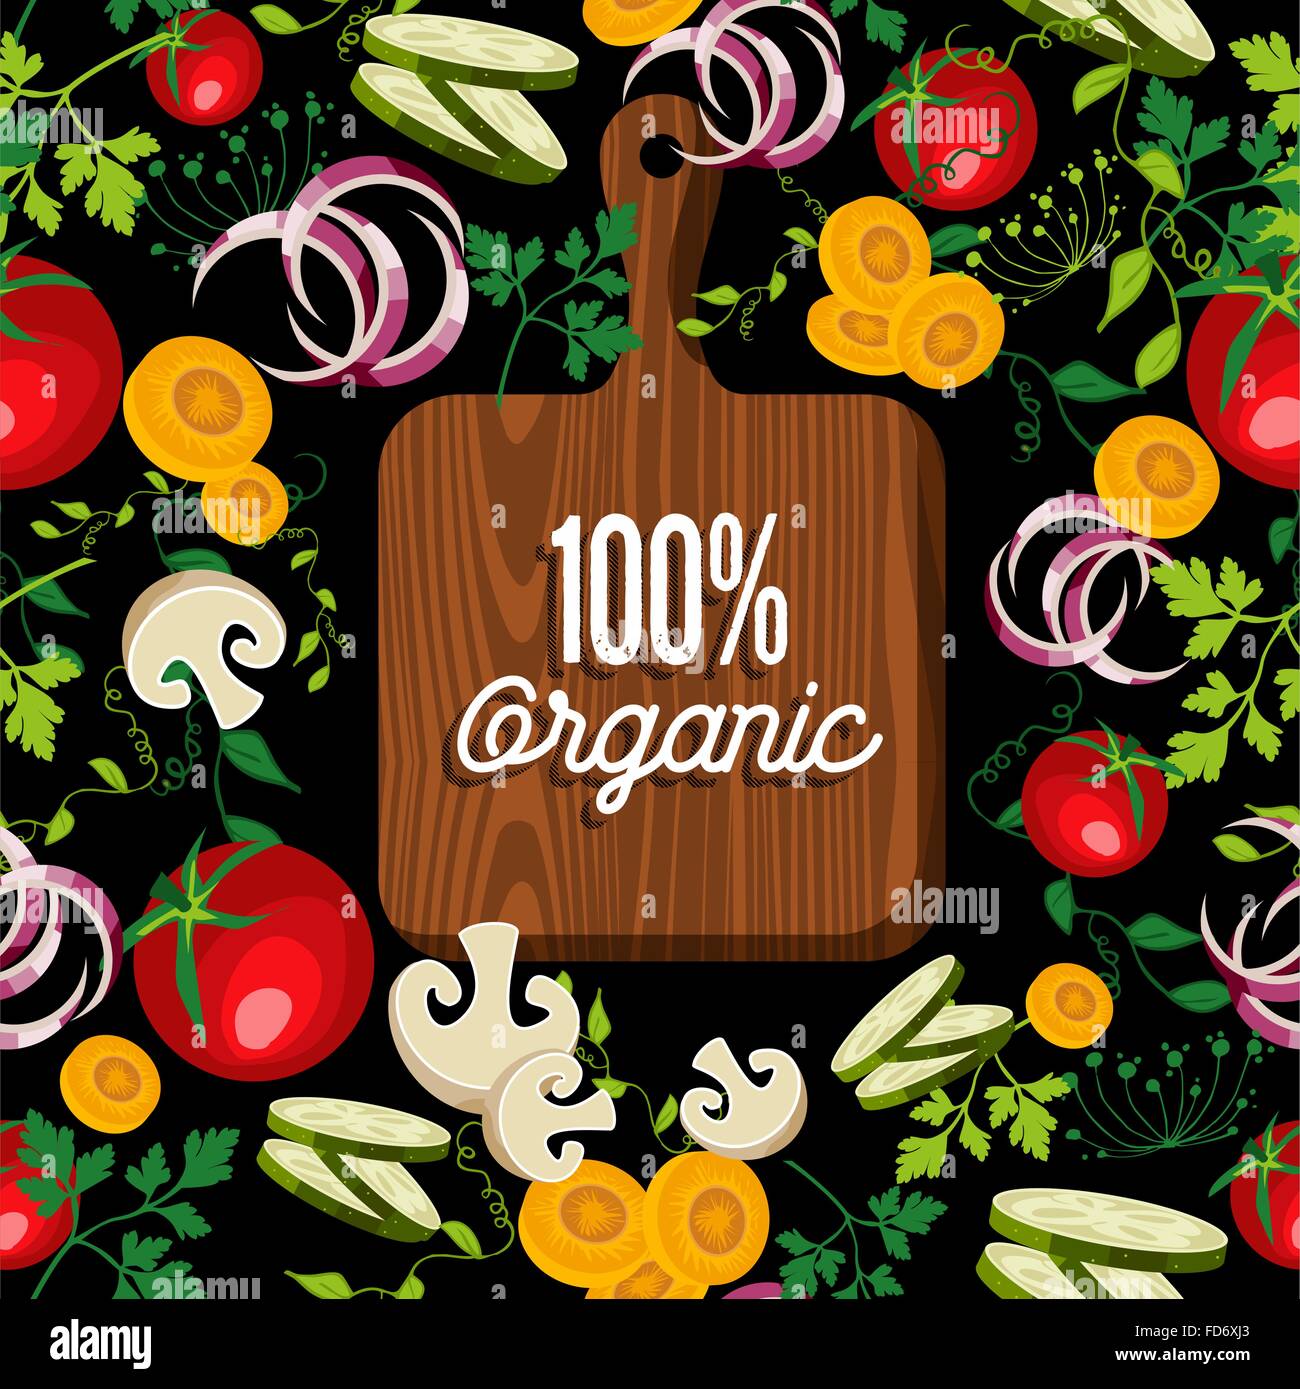 Raw vegetables spread around cutting board with 100% organic text quote, concept illustration. EPS10 vector. Stock Vector